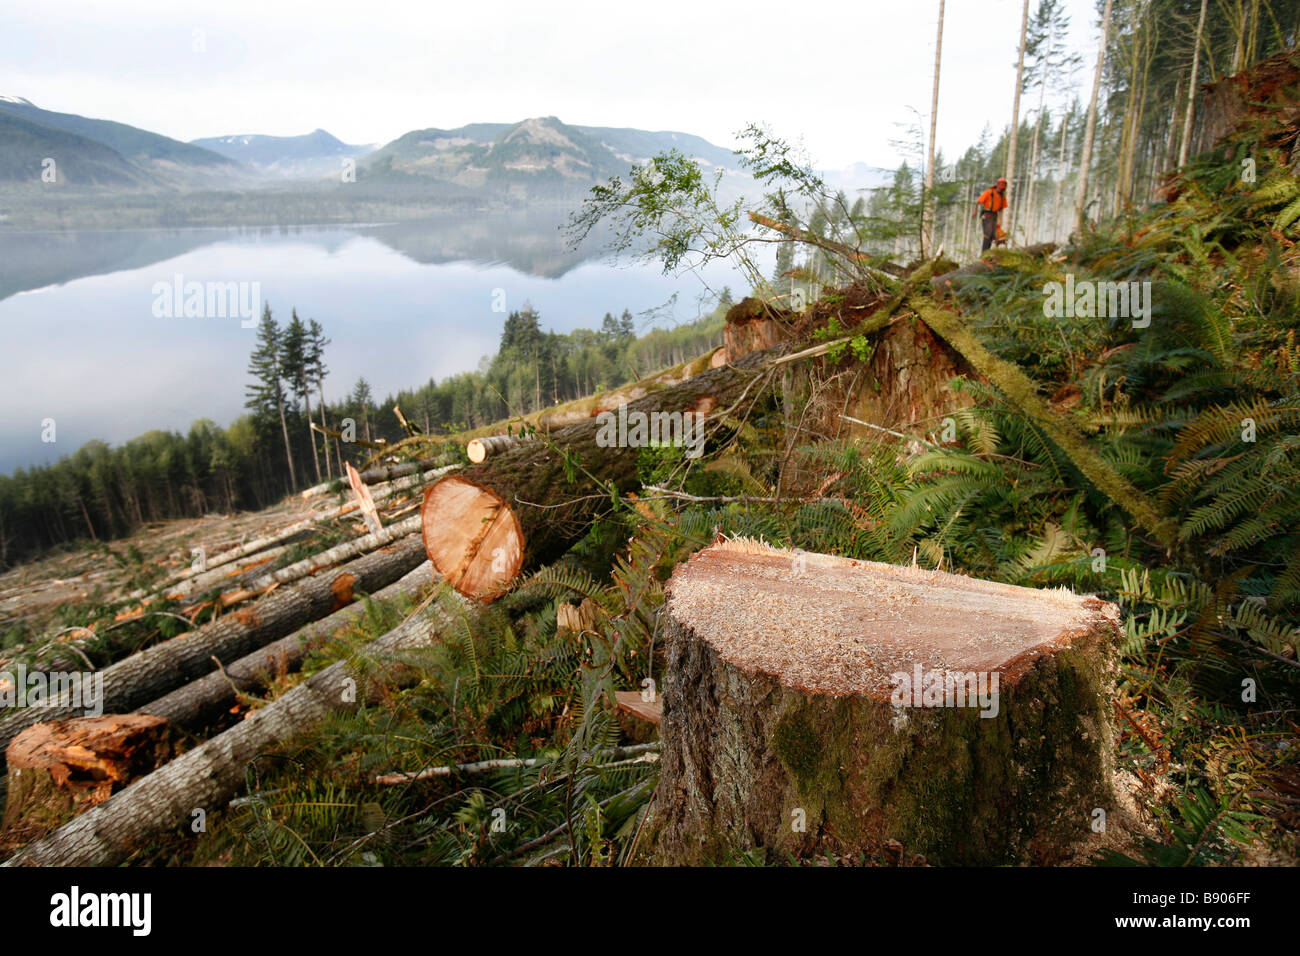 A logger in a clear cut section of rainforest on Vancouver Island, British Columbia, Canada. Stock Photo